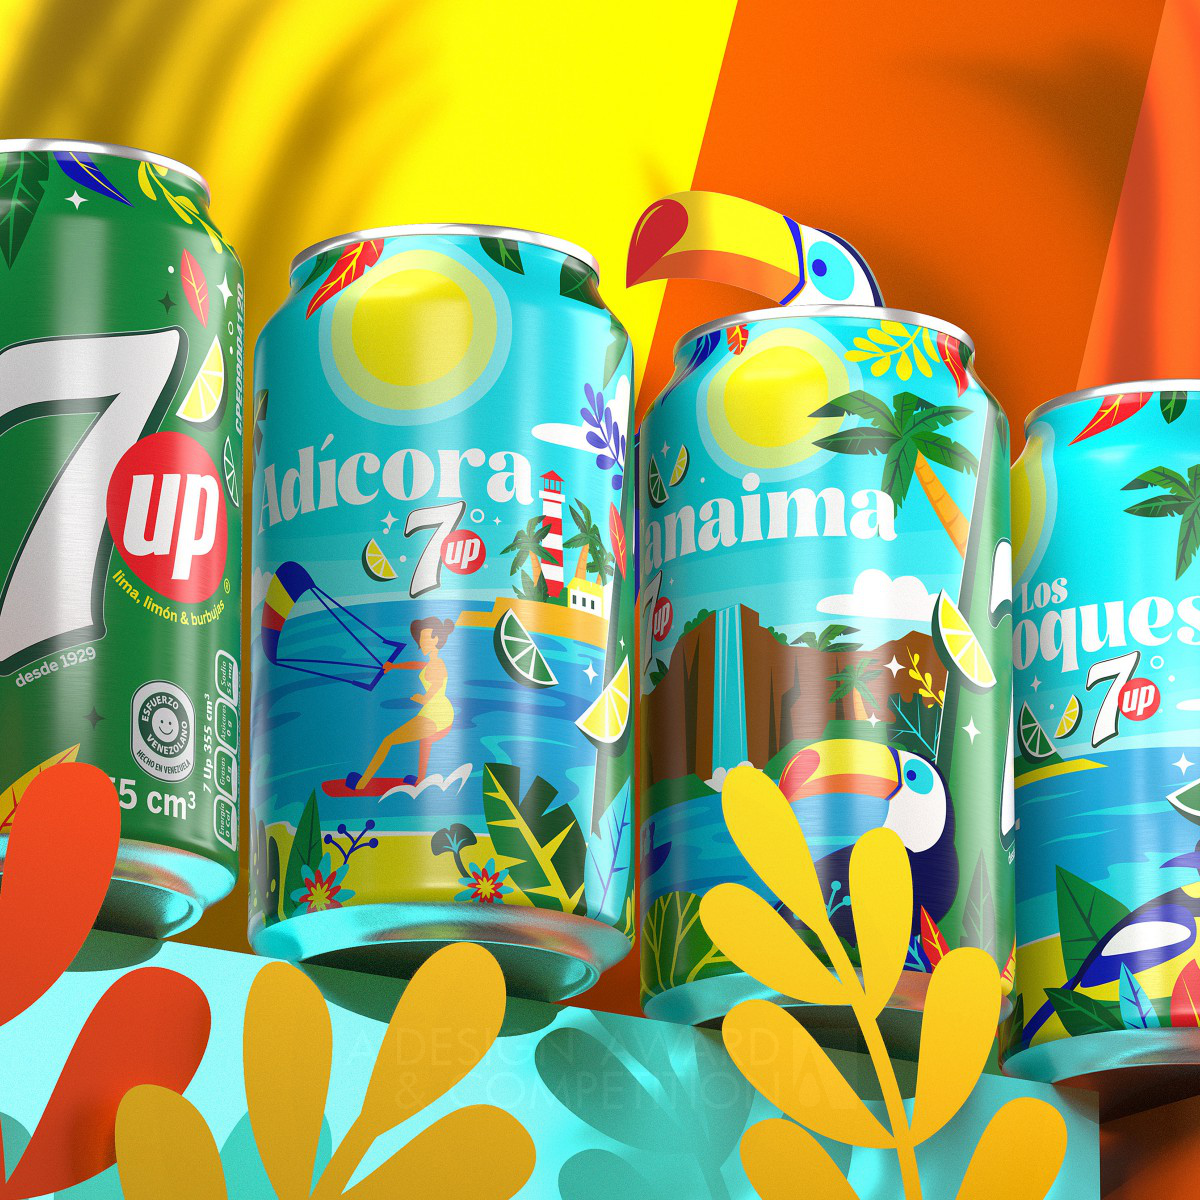 PepsiCo Design and Innovation wins Bronze at the prestigious A' Packaging Design Award with 7Up Destinations Venezuela Beverage Packaging .